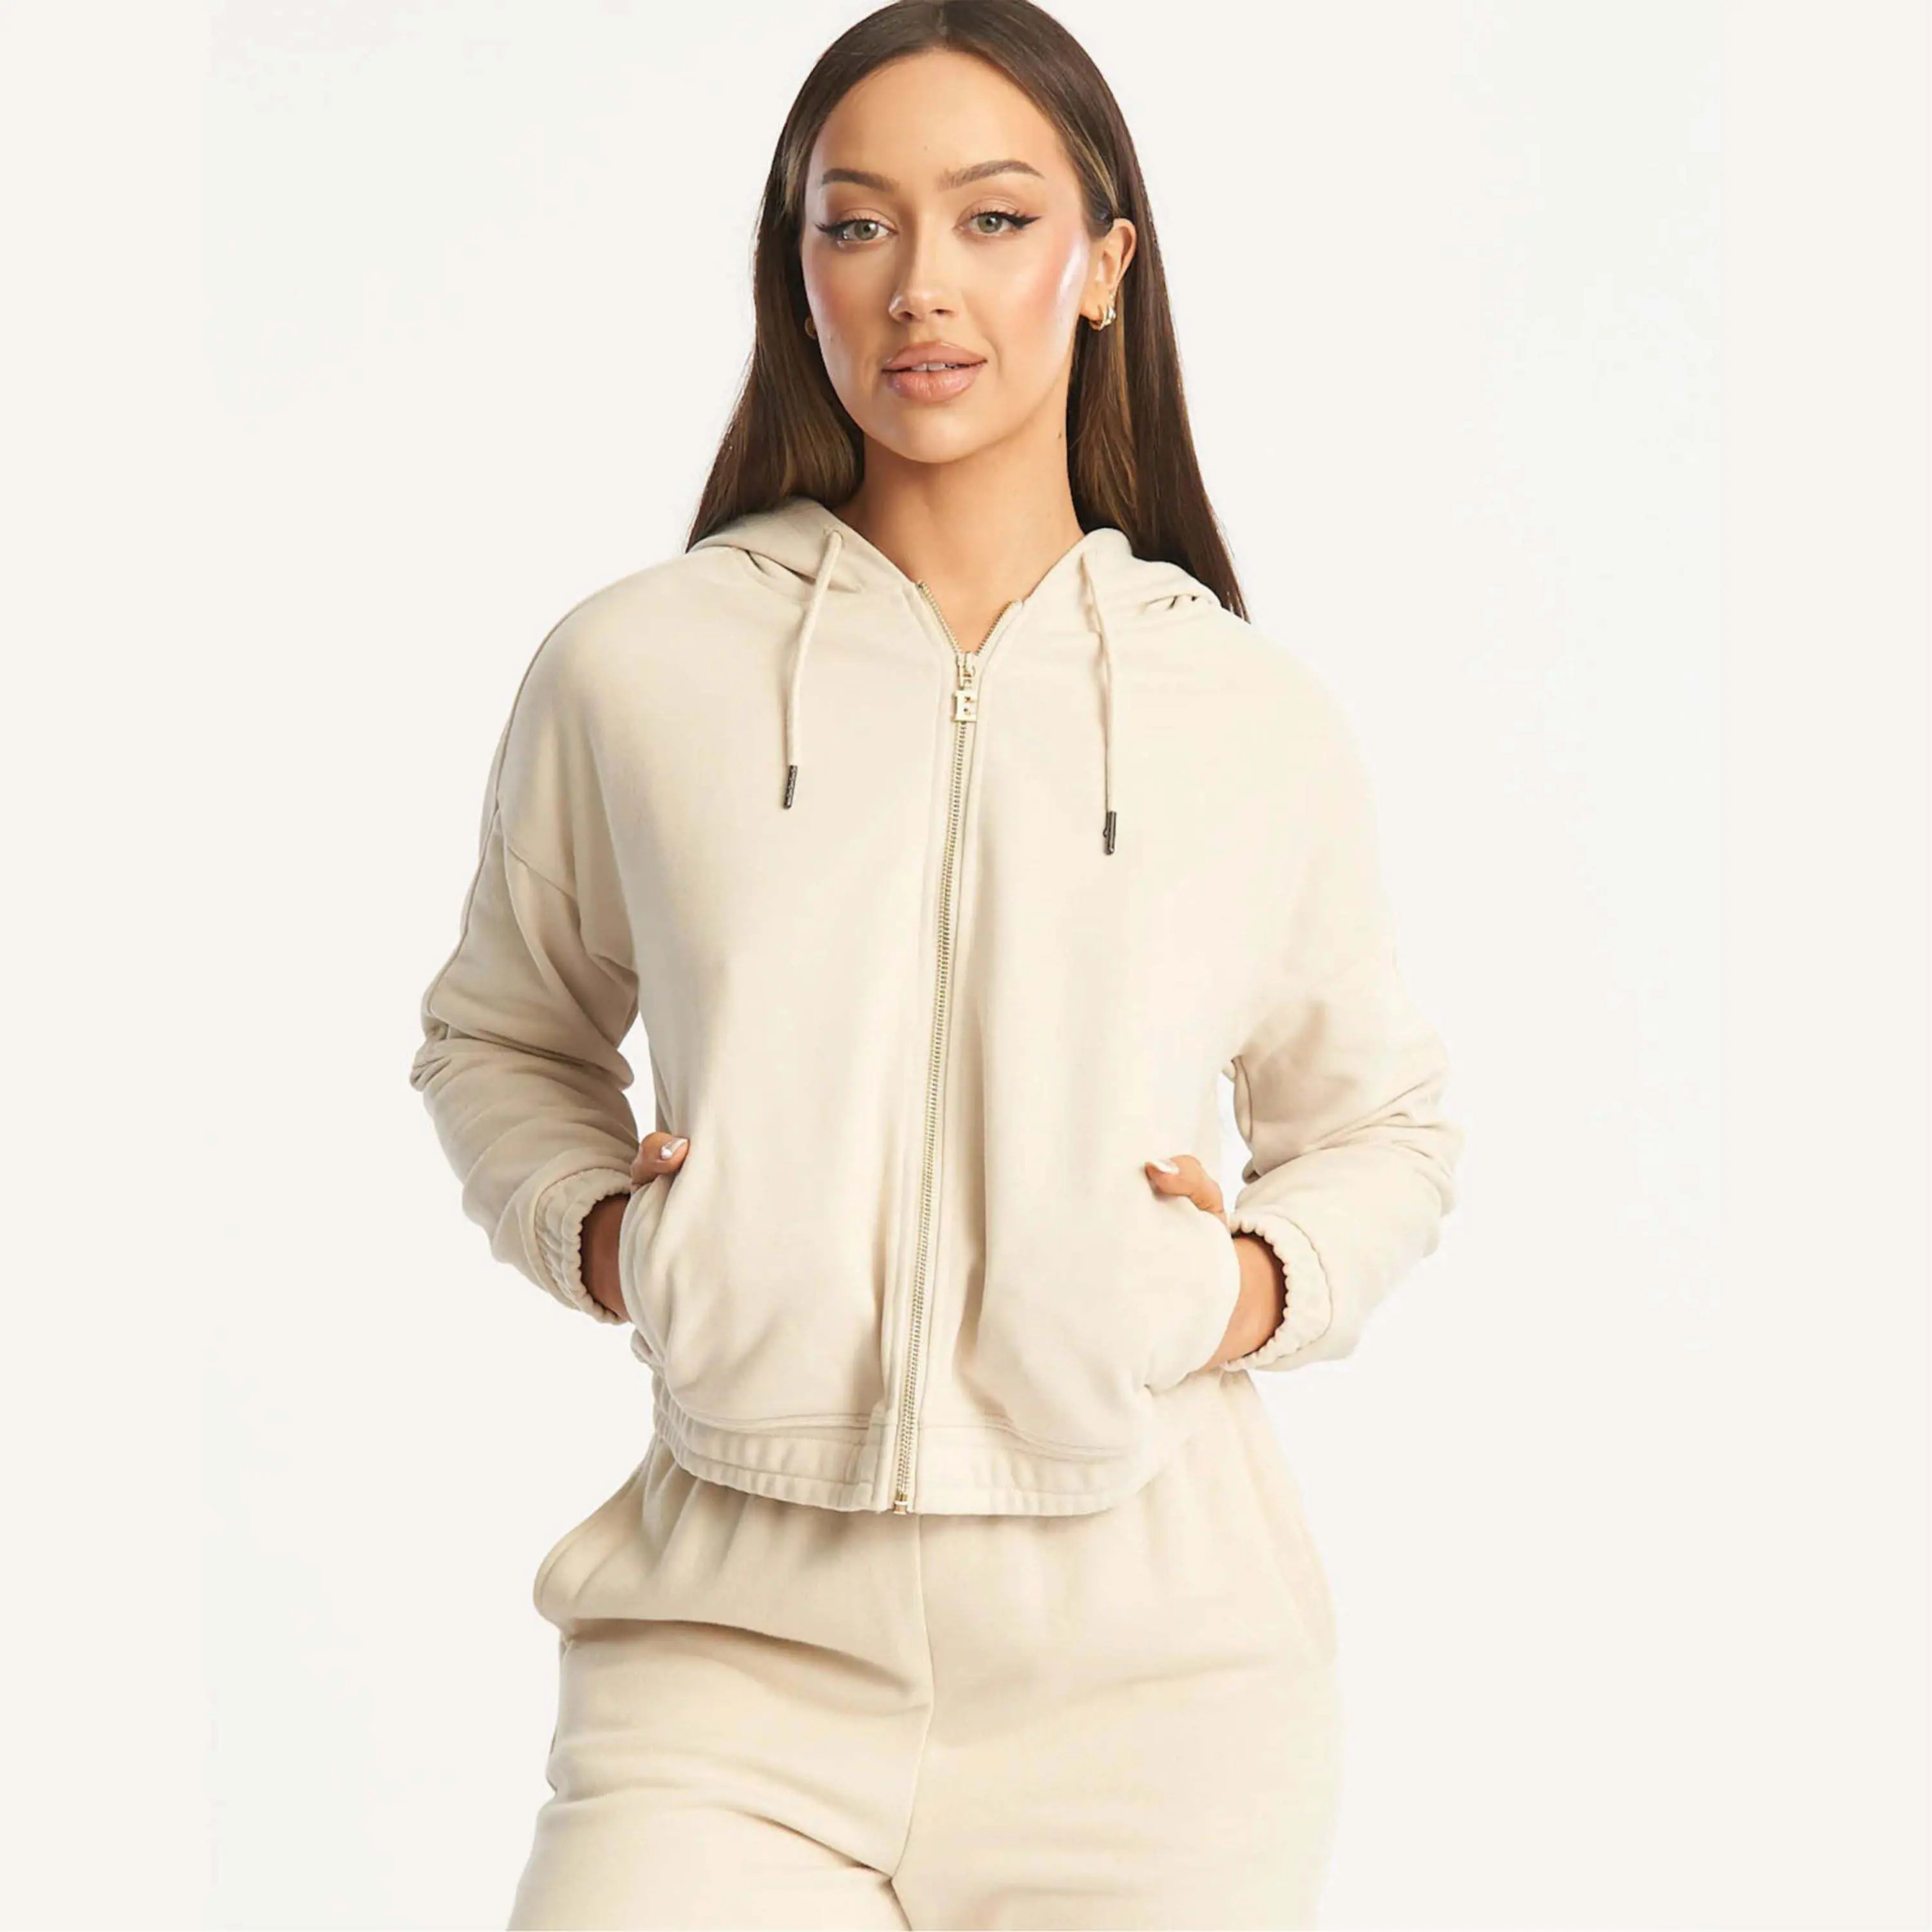 Women's 2-Piece Jogger Set - Crop Top And Stacked Sweatpants Fall Sweatsuit Outfit